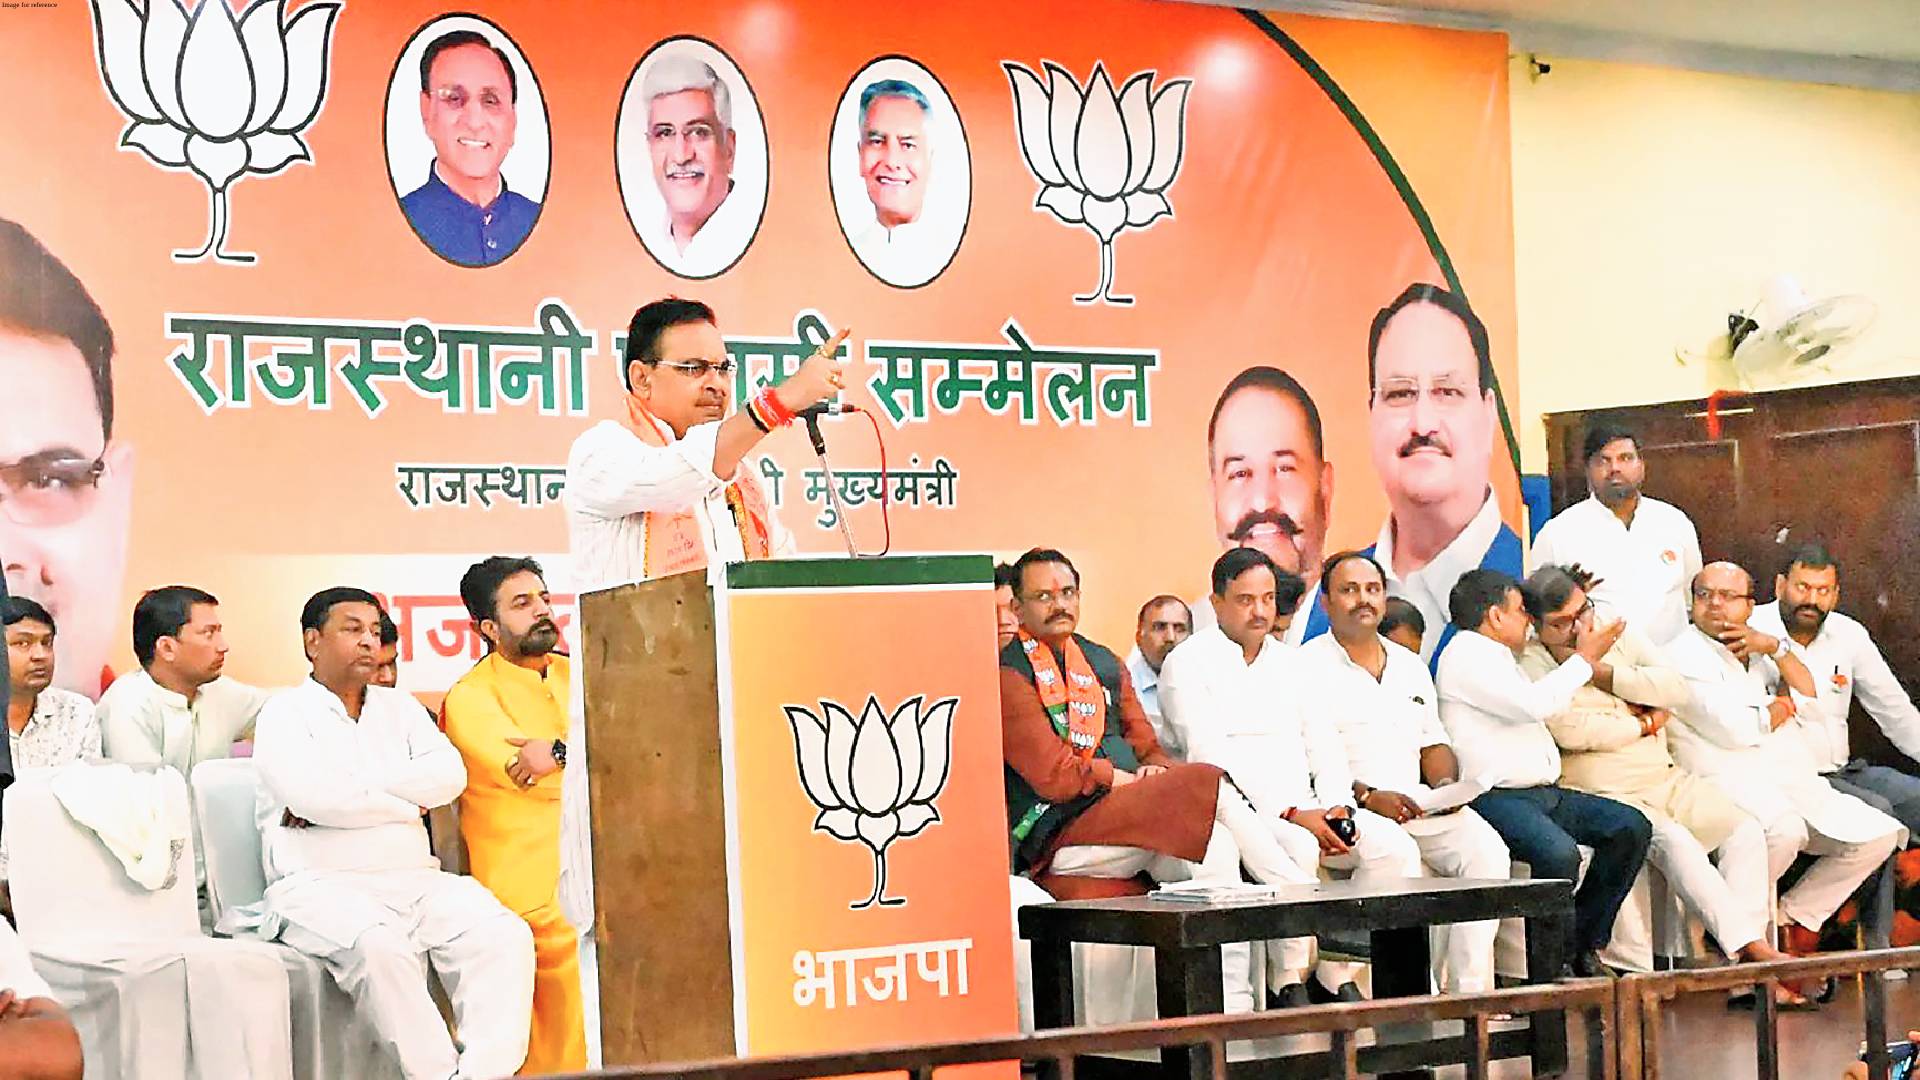 RAJ BJP & CONGRESS LEADERS DISPLAY THEIR STRENGTHS ACROSS COUNTRY IN CAMPAIGNING